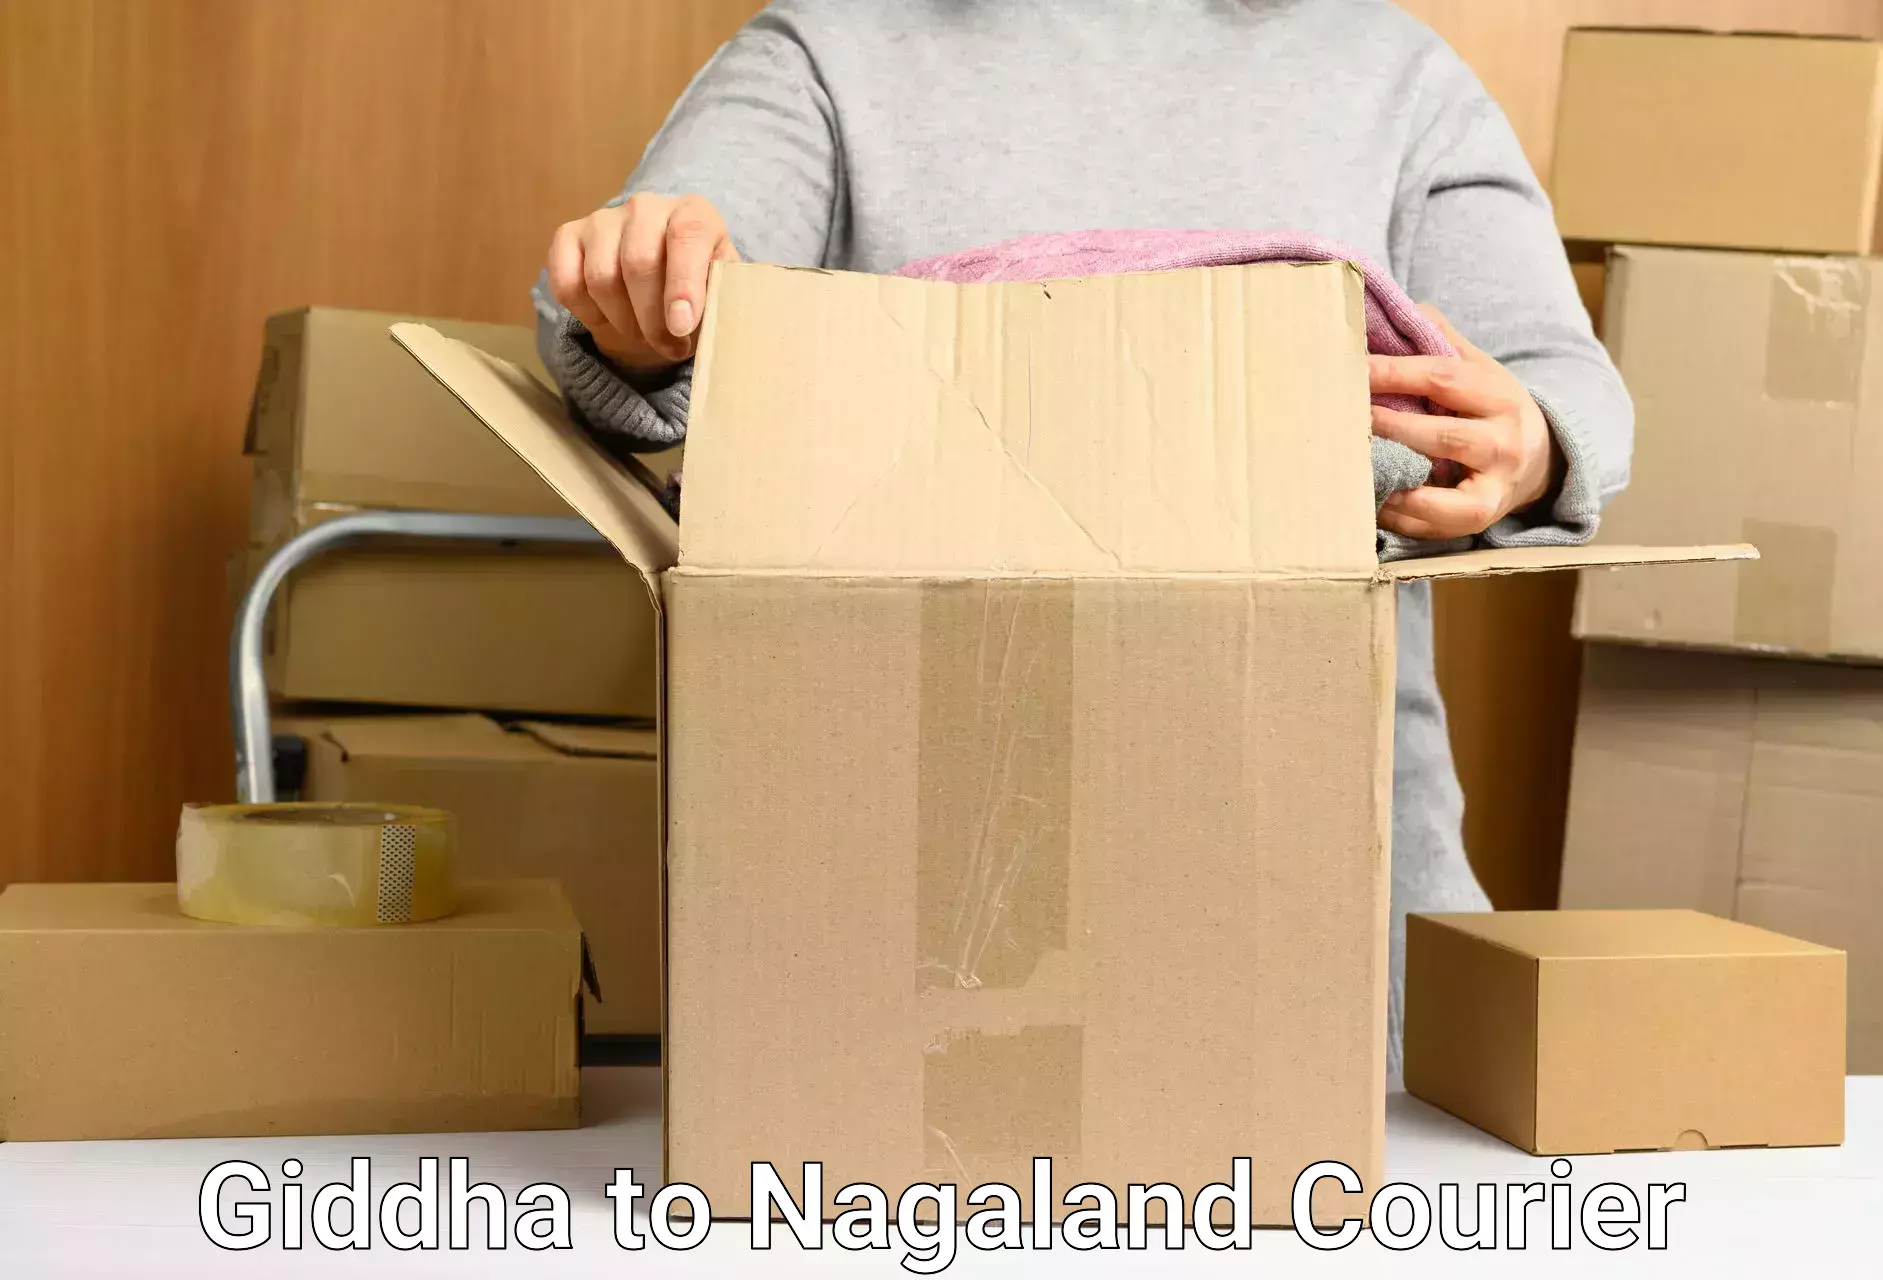 Multi-national courier services Giddha to Nagaland